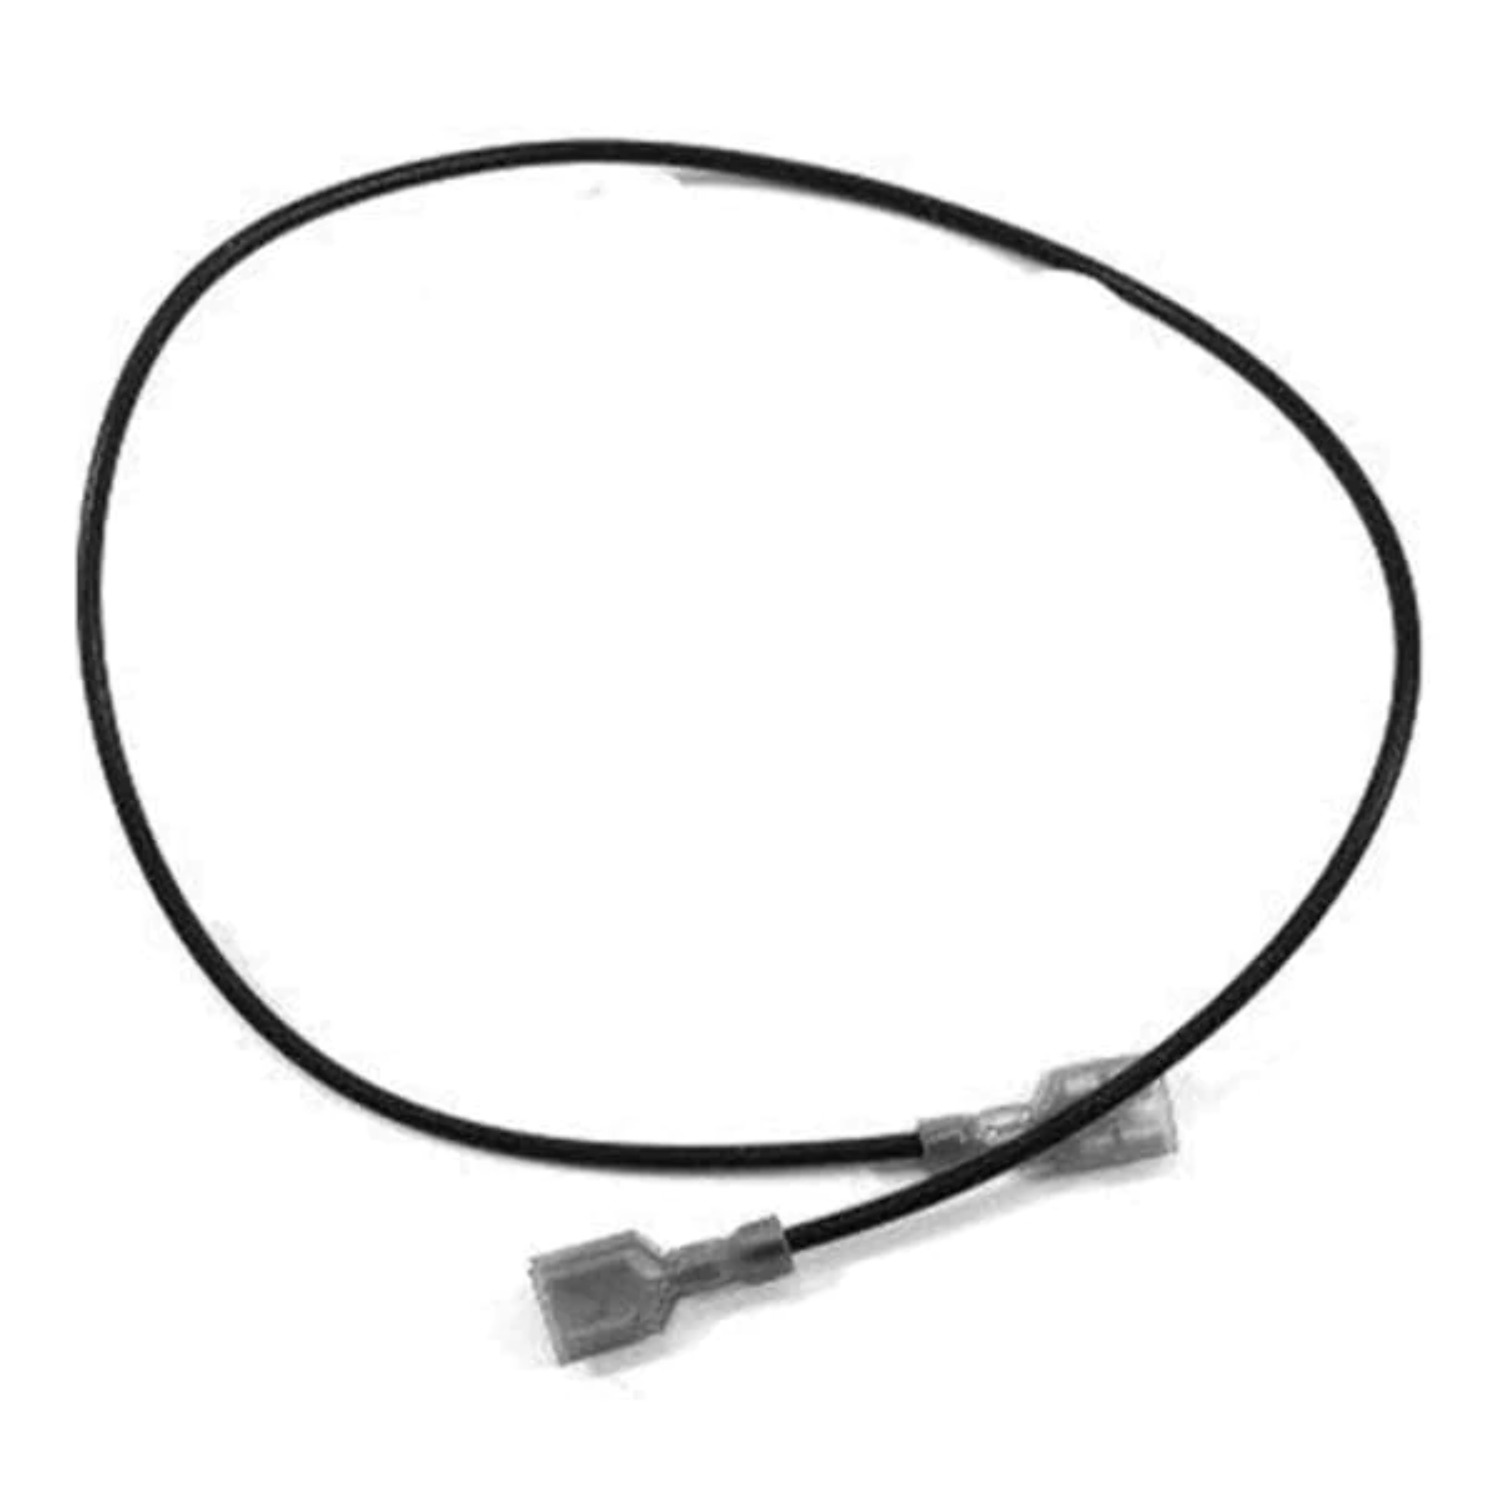 BBQ Grill Compatible With Viking Grills Ignitor Wire 15 G4006380 - image 1 of 3